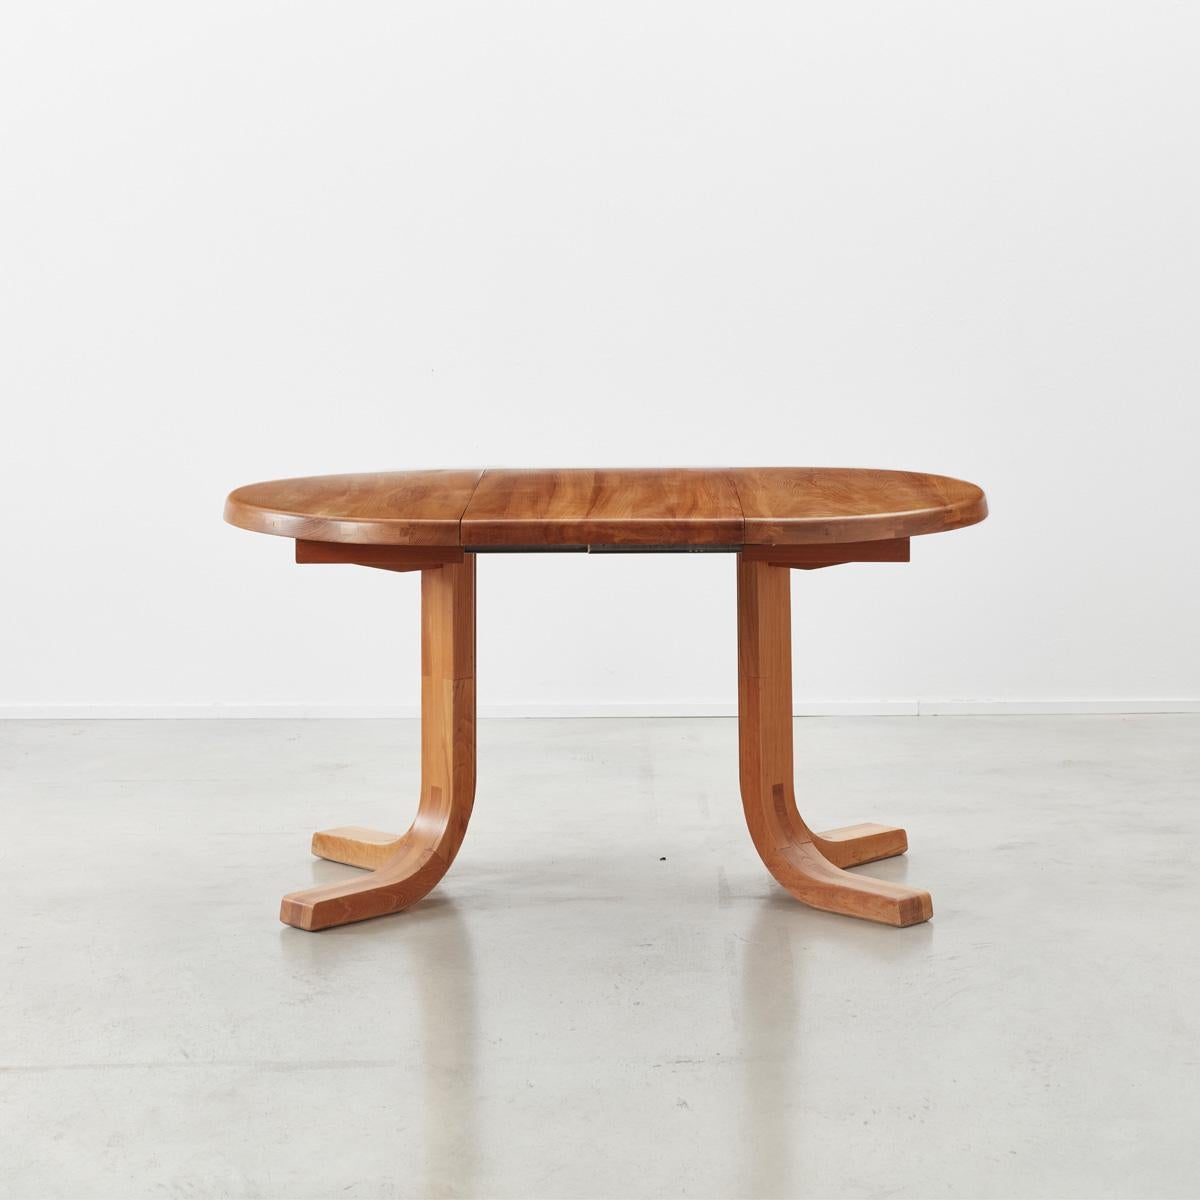 Pierre Chapo T40A table made from solid elm. A small round table in solid elm (D95 cm) extending to a long eight-seat table (L220cm), with two extensions. 

Table beautifully refinished. 

Measures: H720cm. Small D95cm round, fully extended D95